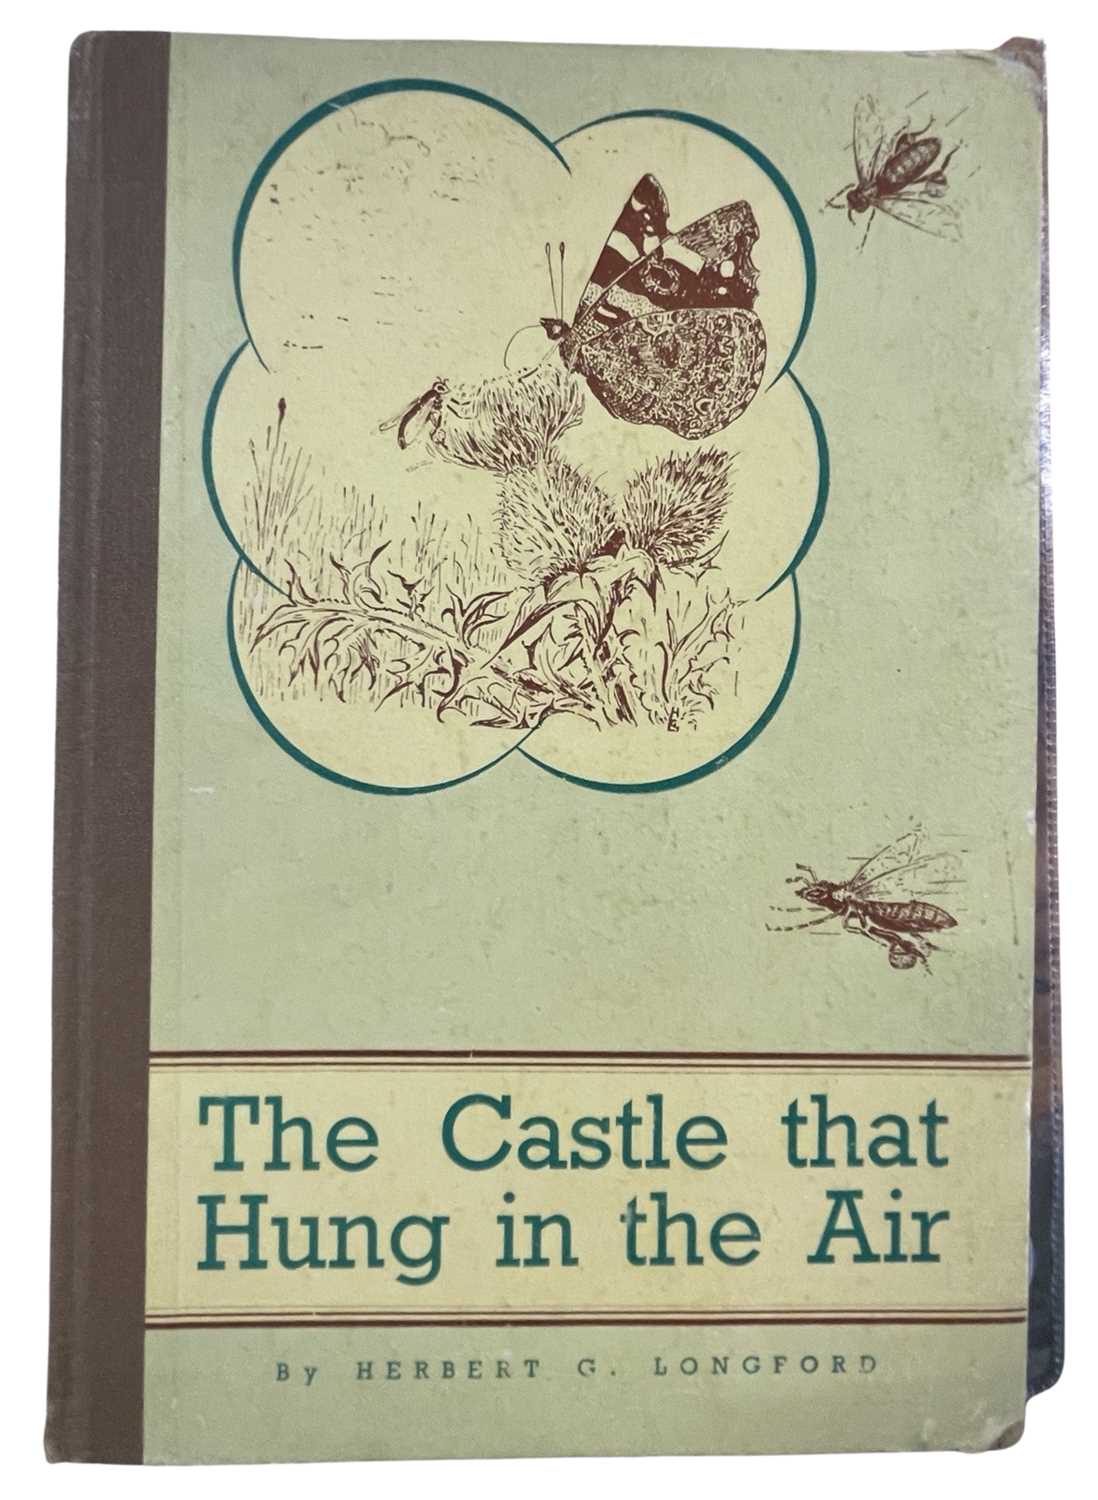 HERBERT G LONGFORD: THE CASTLE THAT HUNG IN THE AIR, Longford, Clegg and Son, 1946, scarce